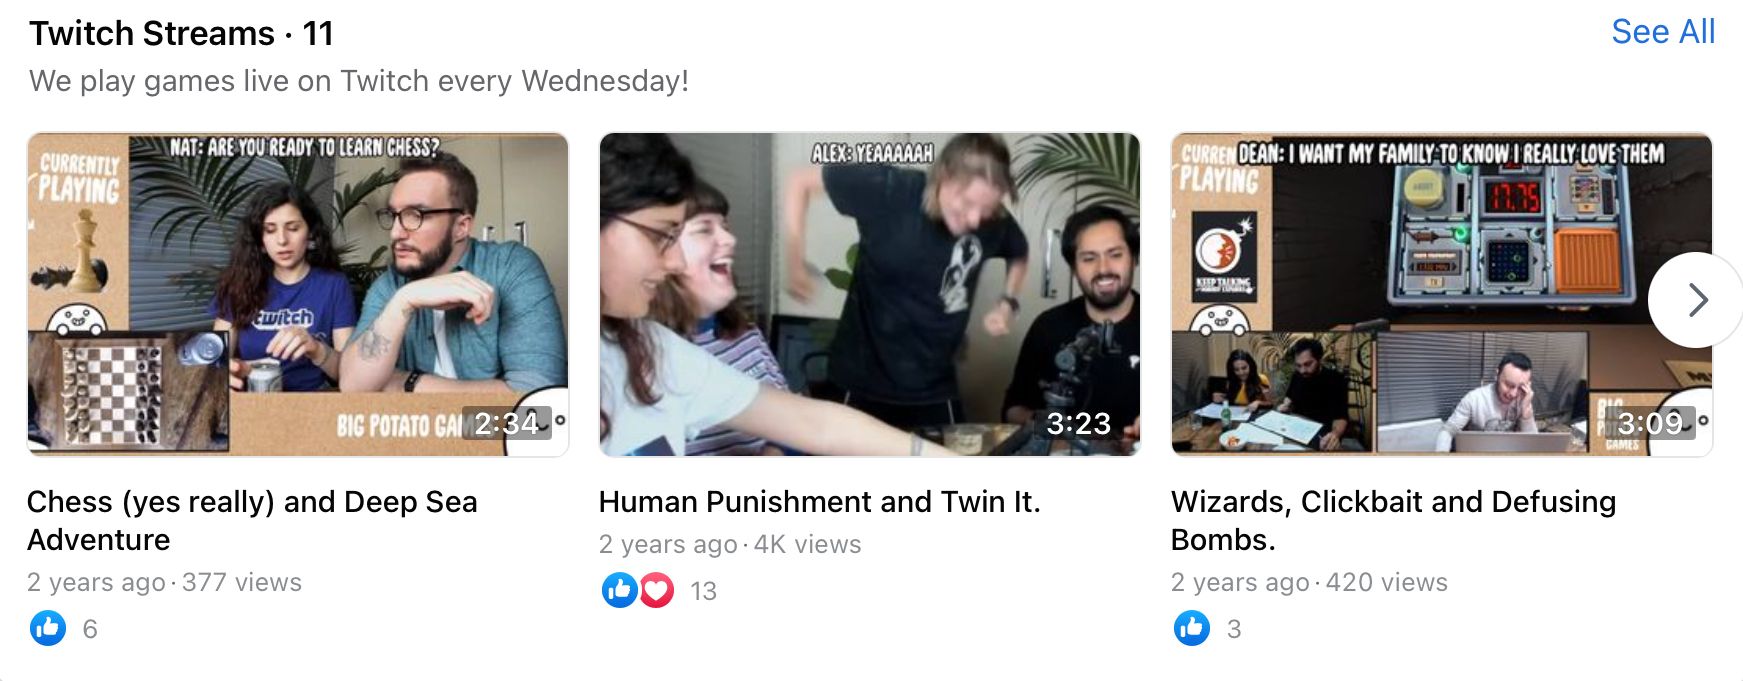 Facebook video playlist showcasing the Twitch platform with ‘Twitch Streams’ by @bigpotatogames